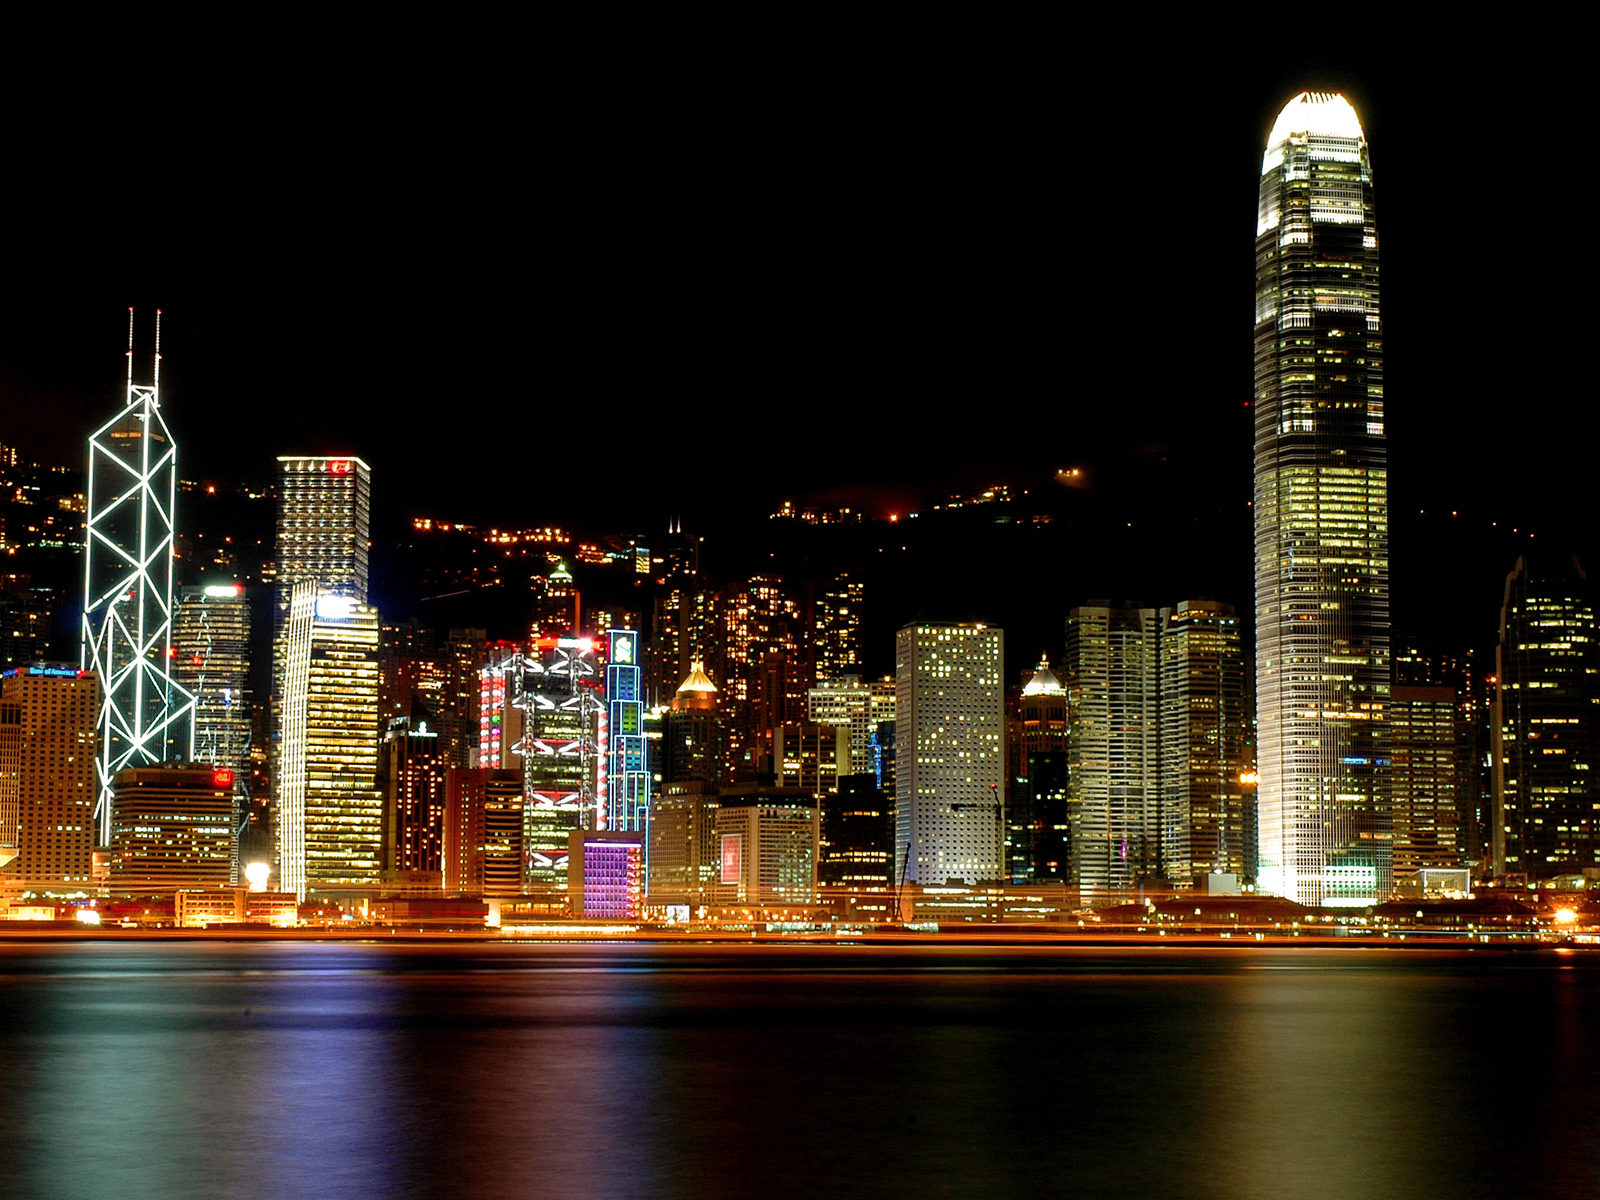 Hong Kong Night Shot Victoria Harbour Best Background Full HD1920x1080p, 1280x720p, – HD Wallpapers Backgrounds Desktop, iphone & Android Free Download